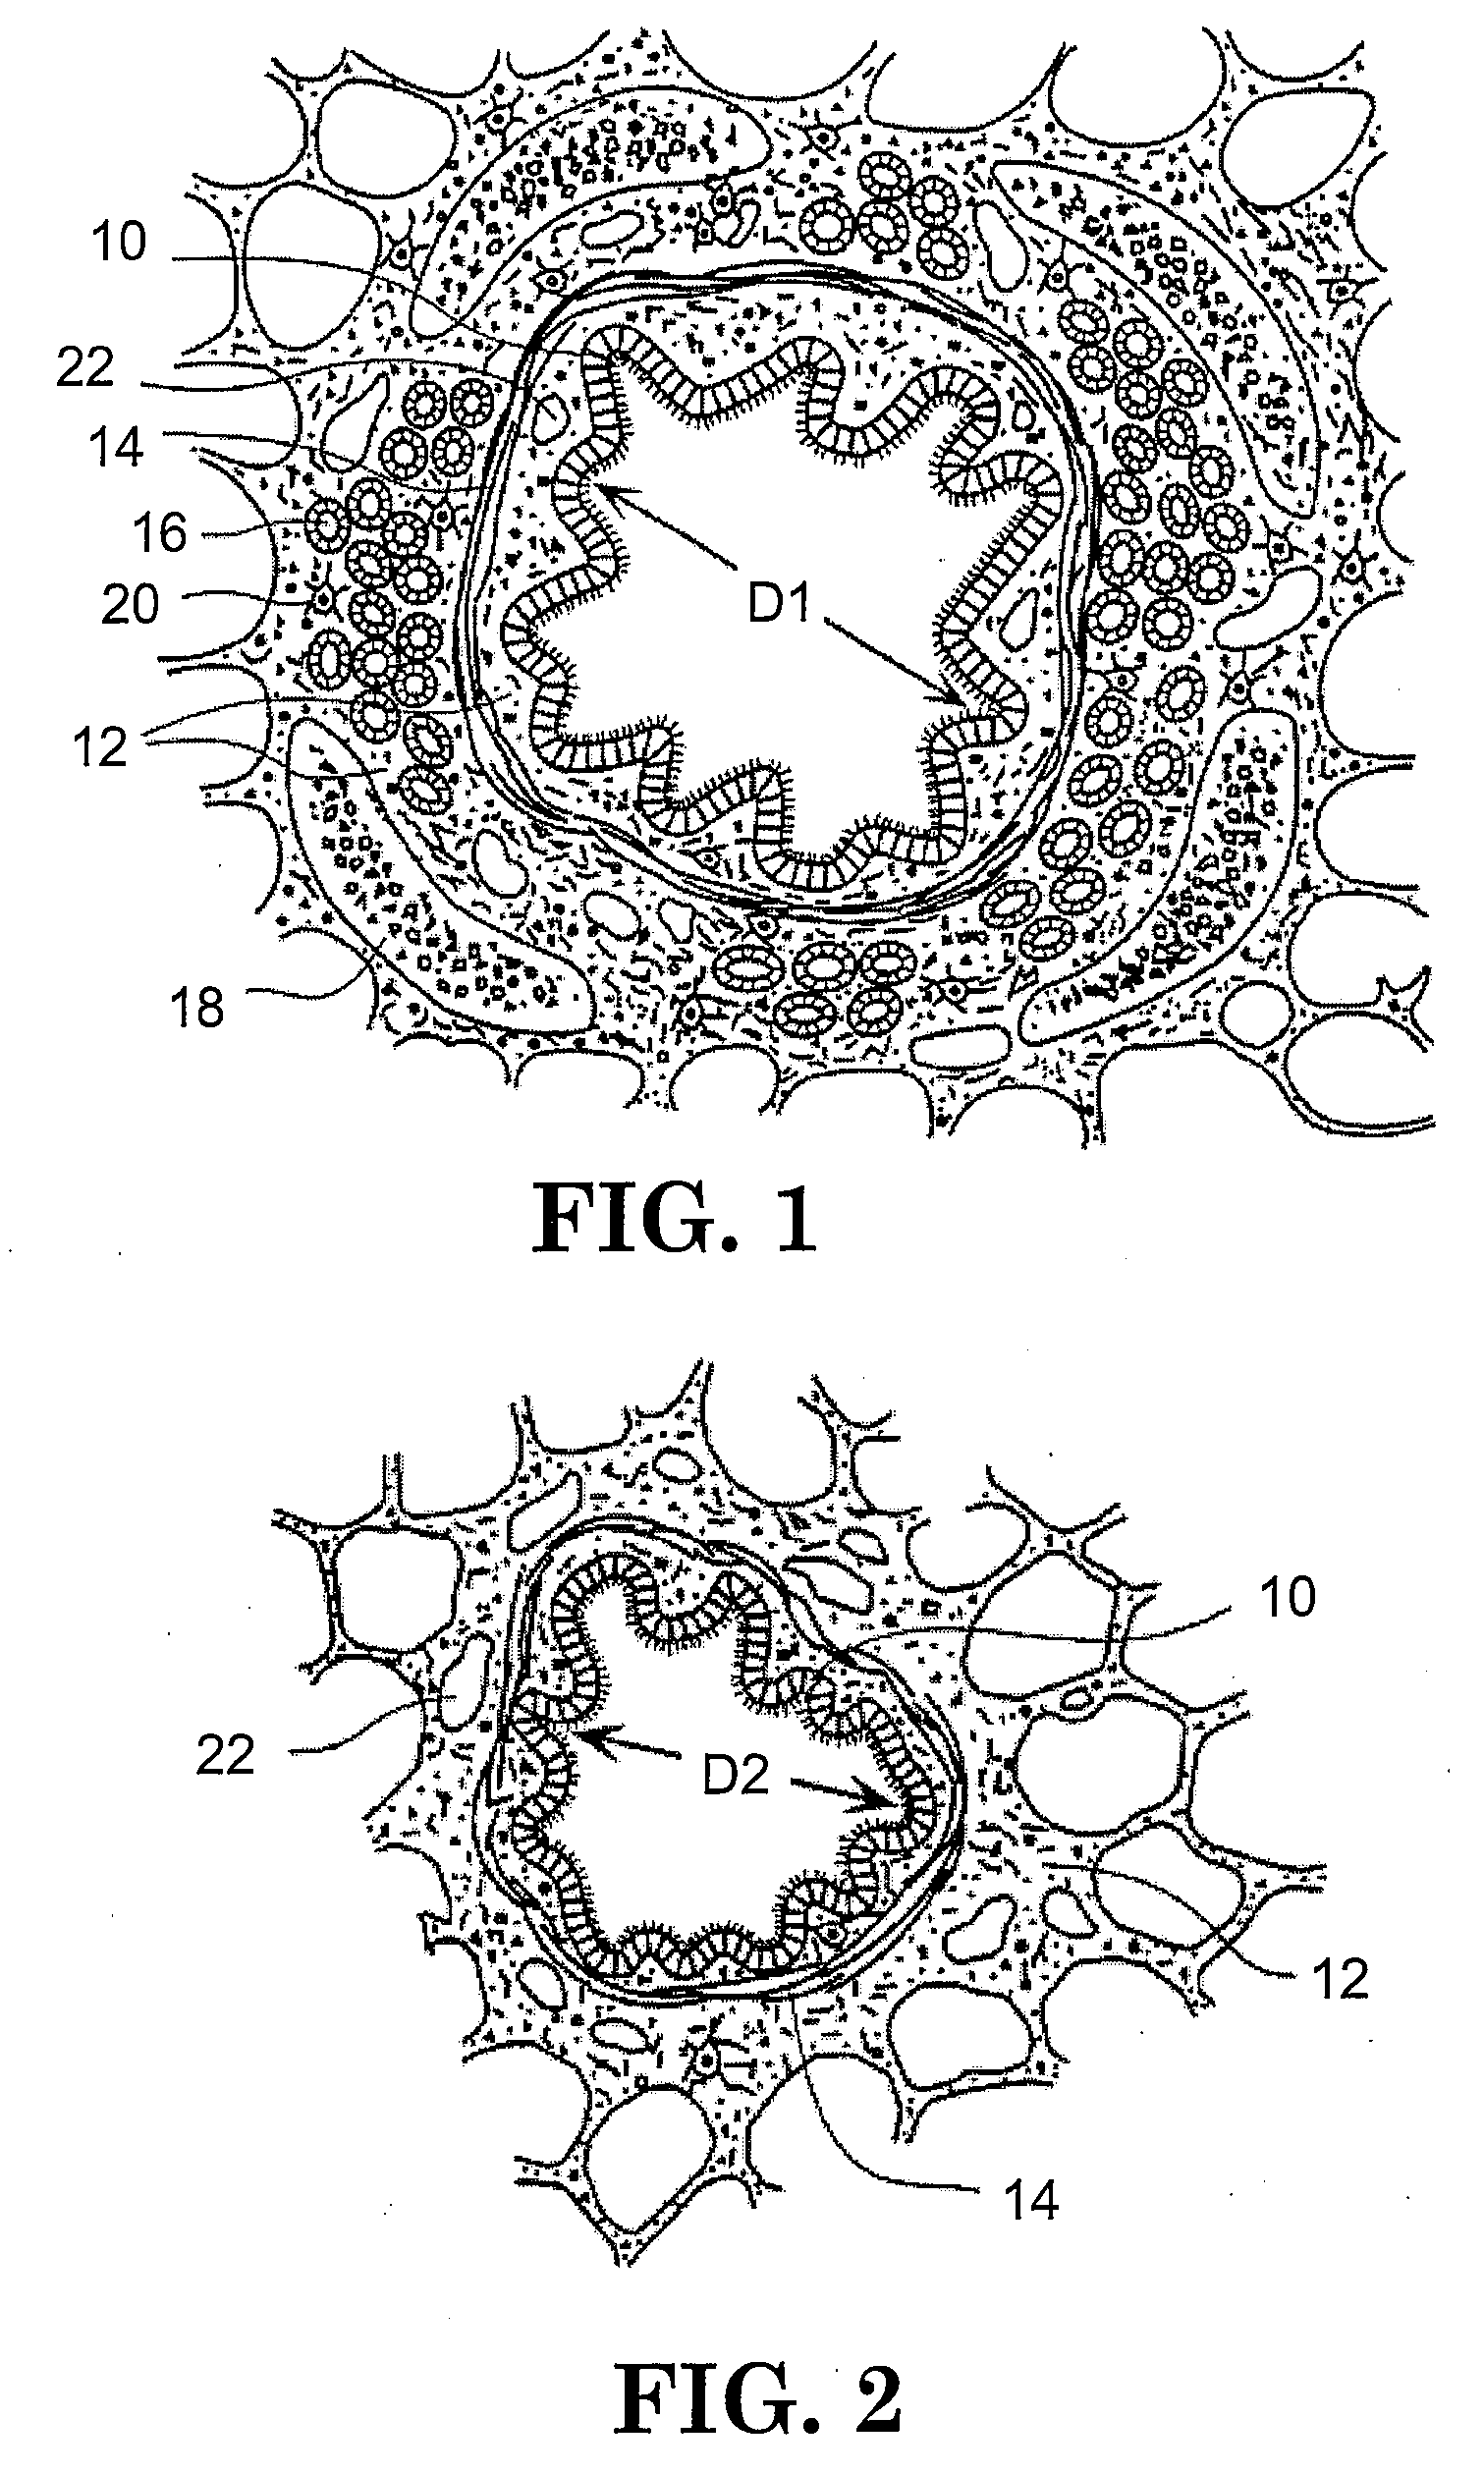 Apparatus for treating airways in the lung